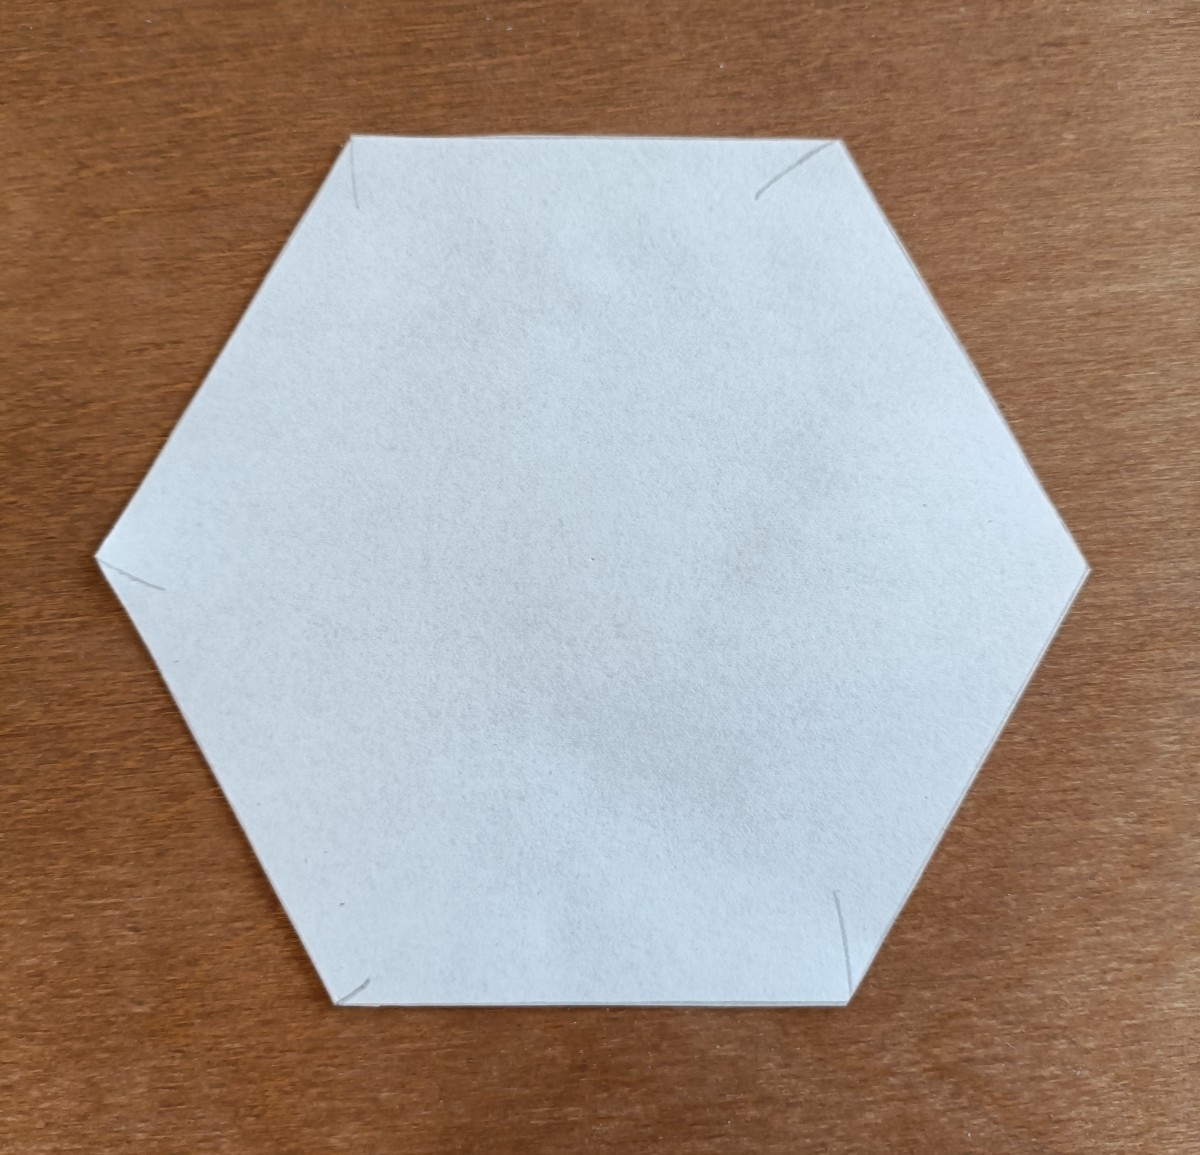 Regular Hexagon Created Without Measuring Lines or Angles